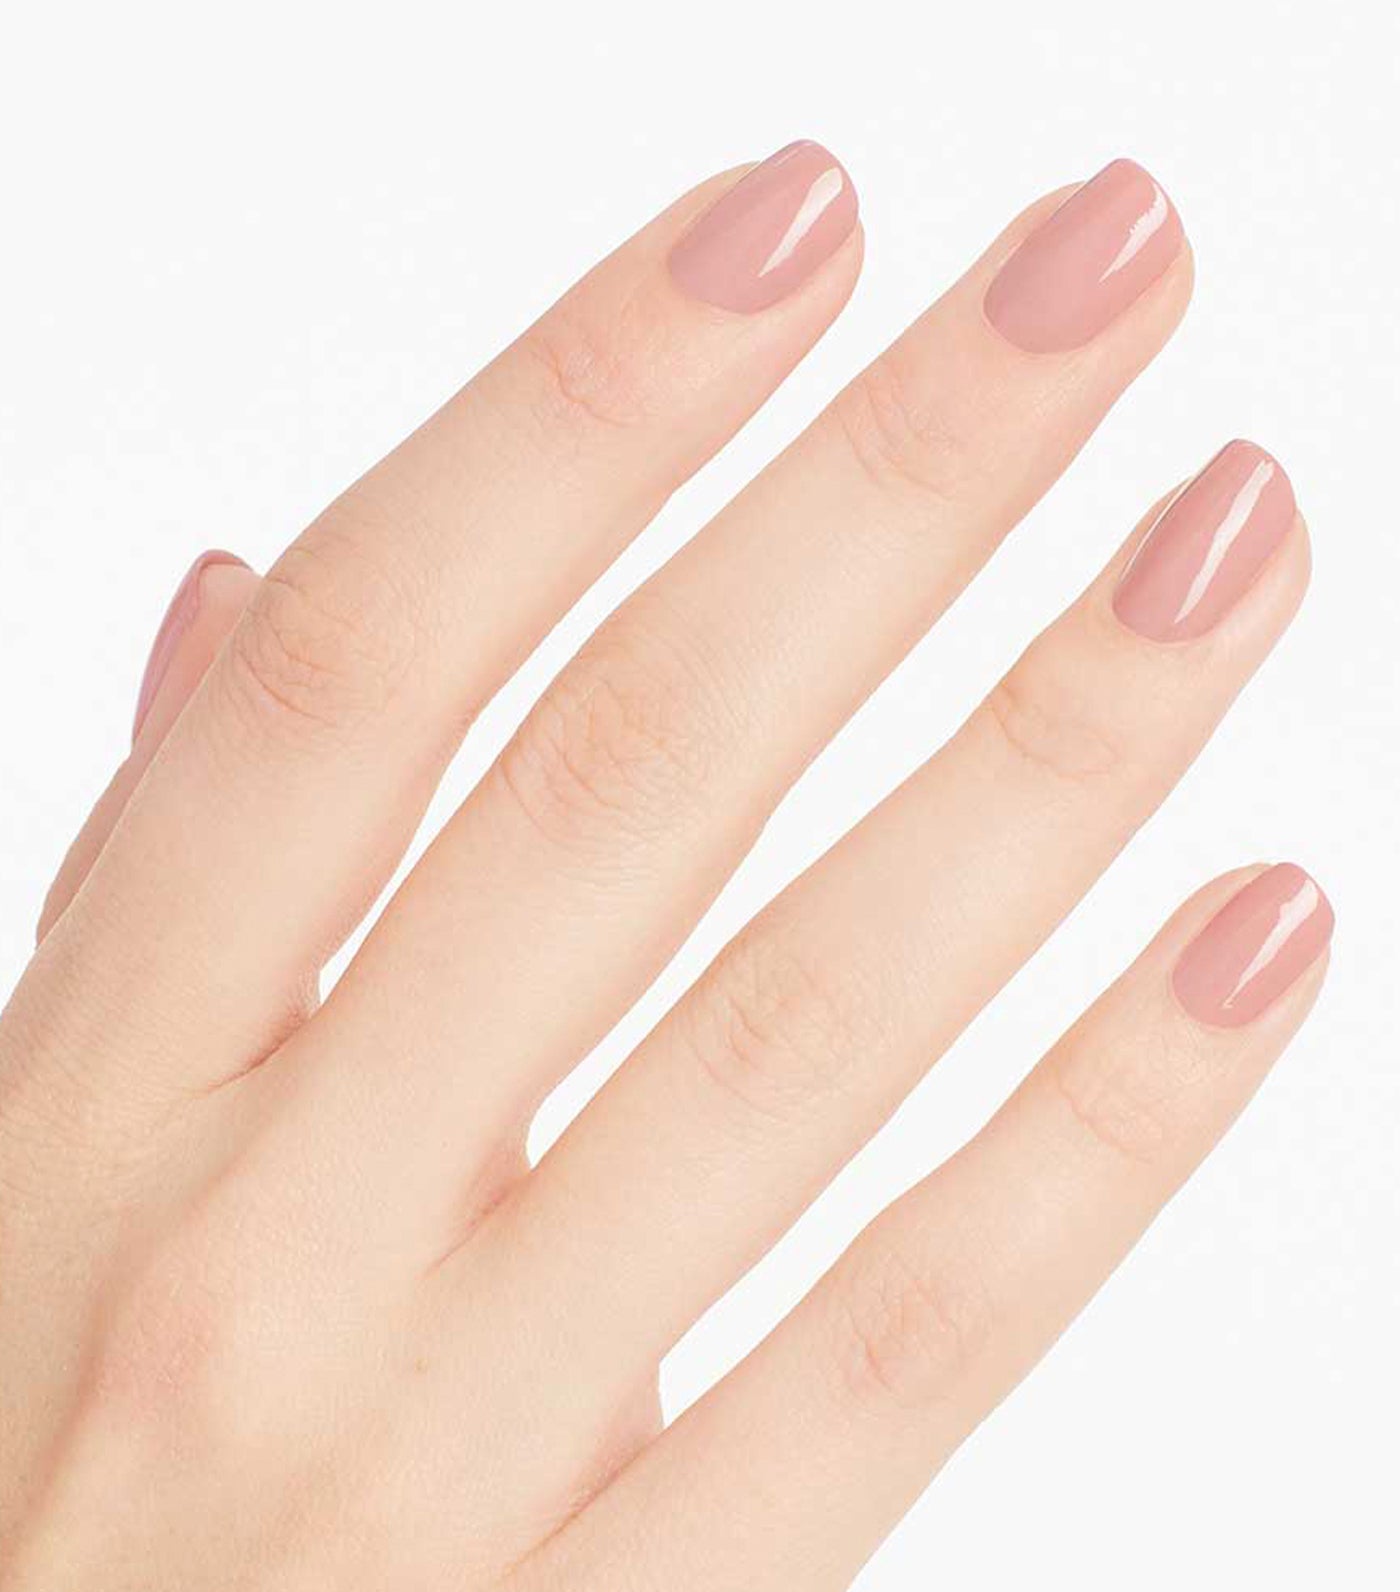 Nail Lacquer - Pinks